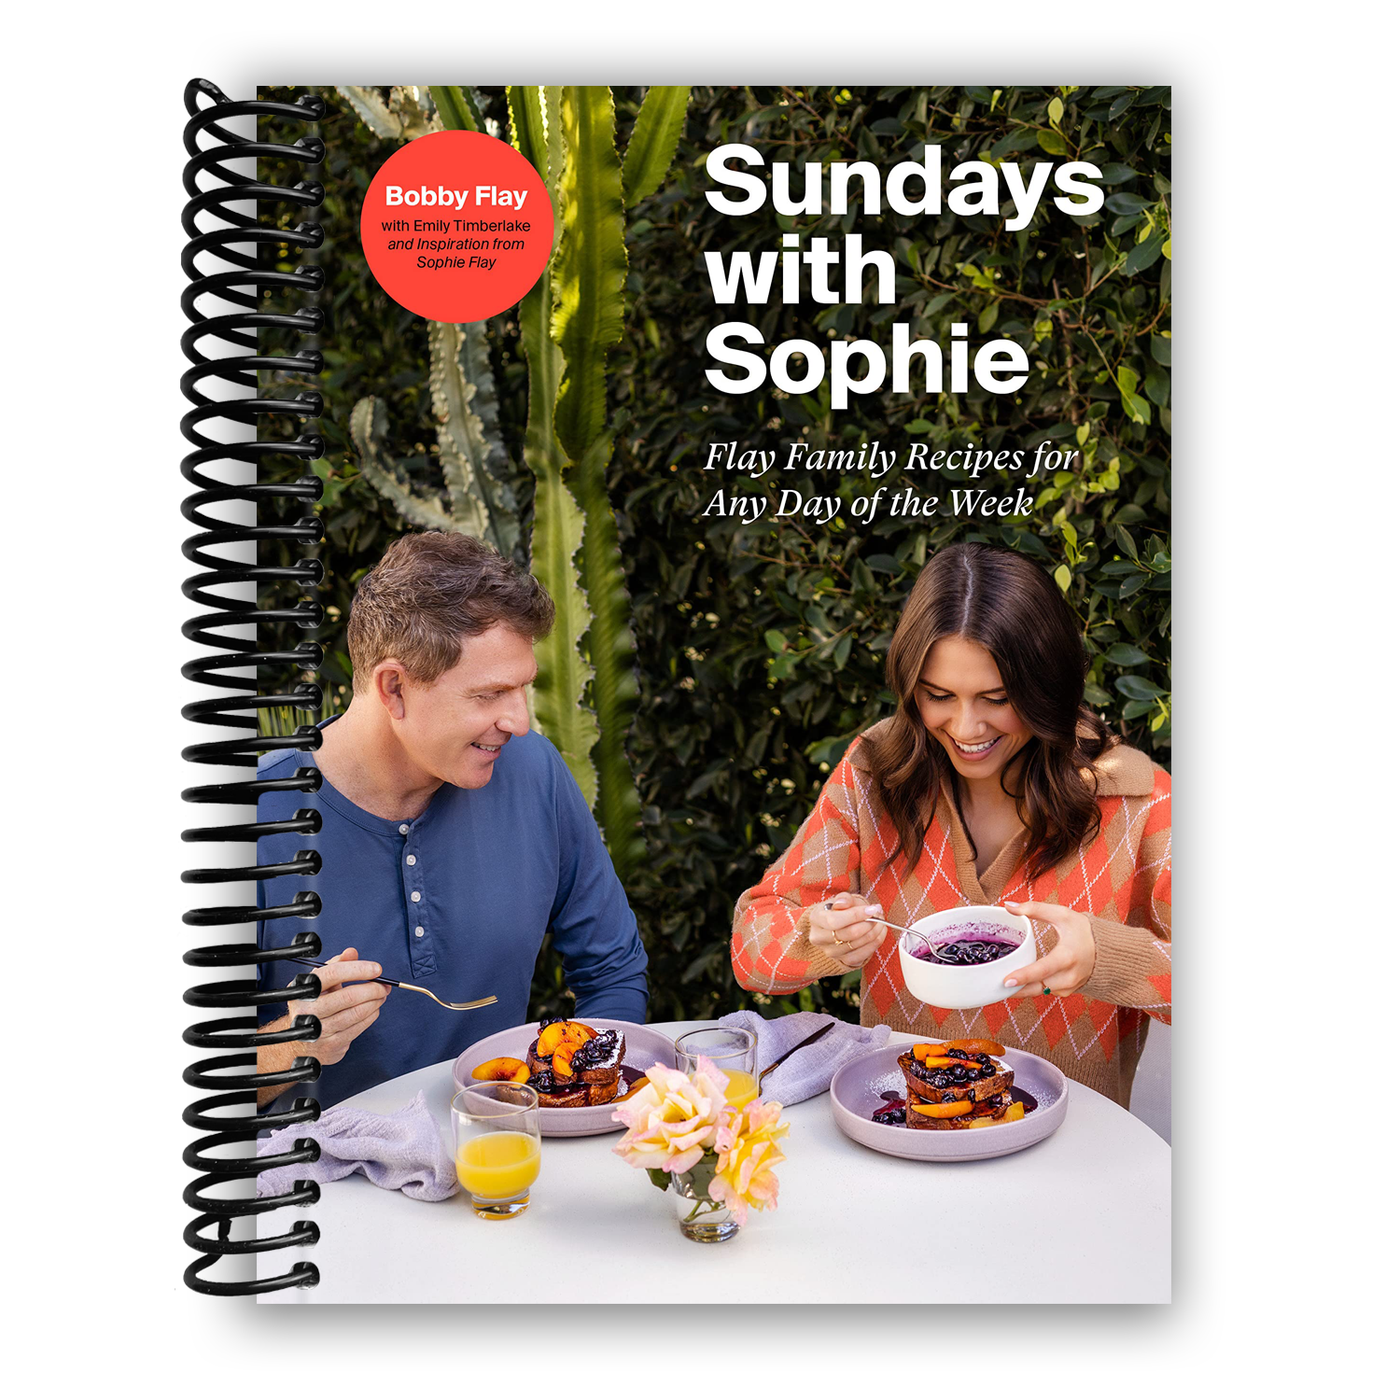 Sundays with Sophie: Flay Family Recipes for Any Day of the Week: A Bobby Flay Cookbook (Spiral Bound)